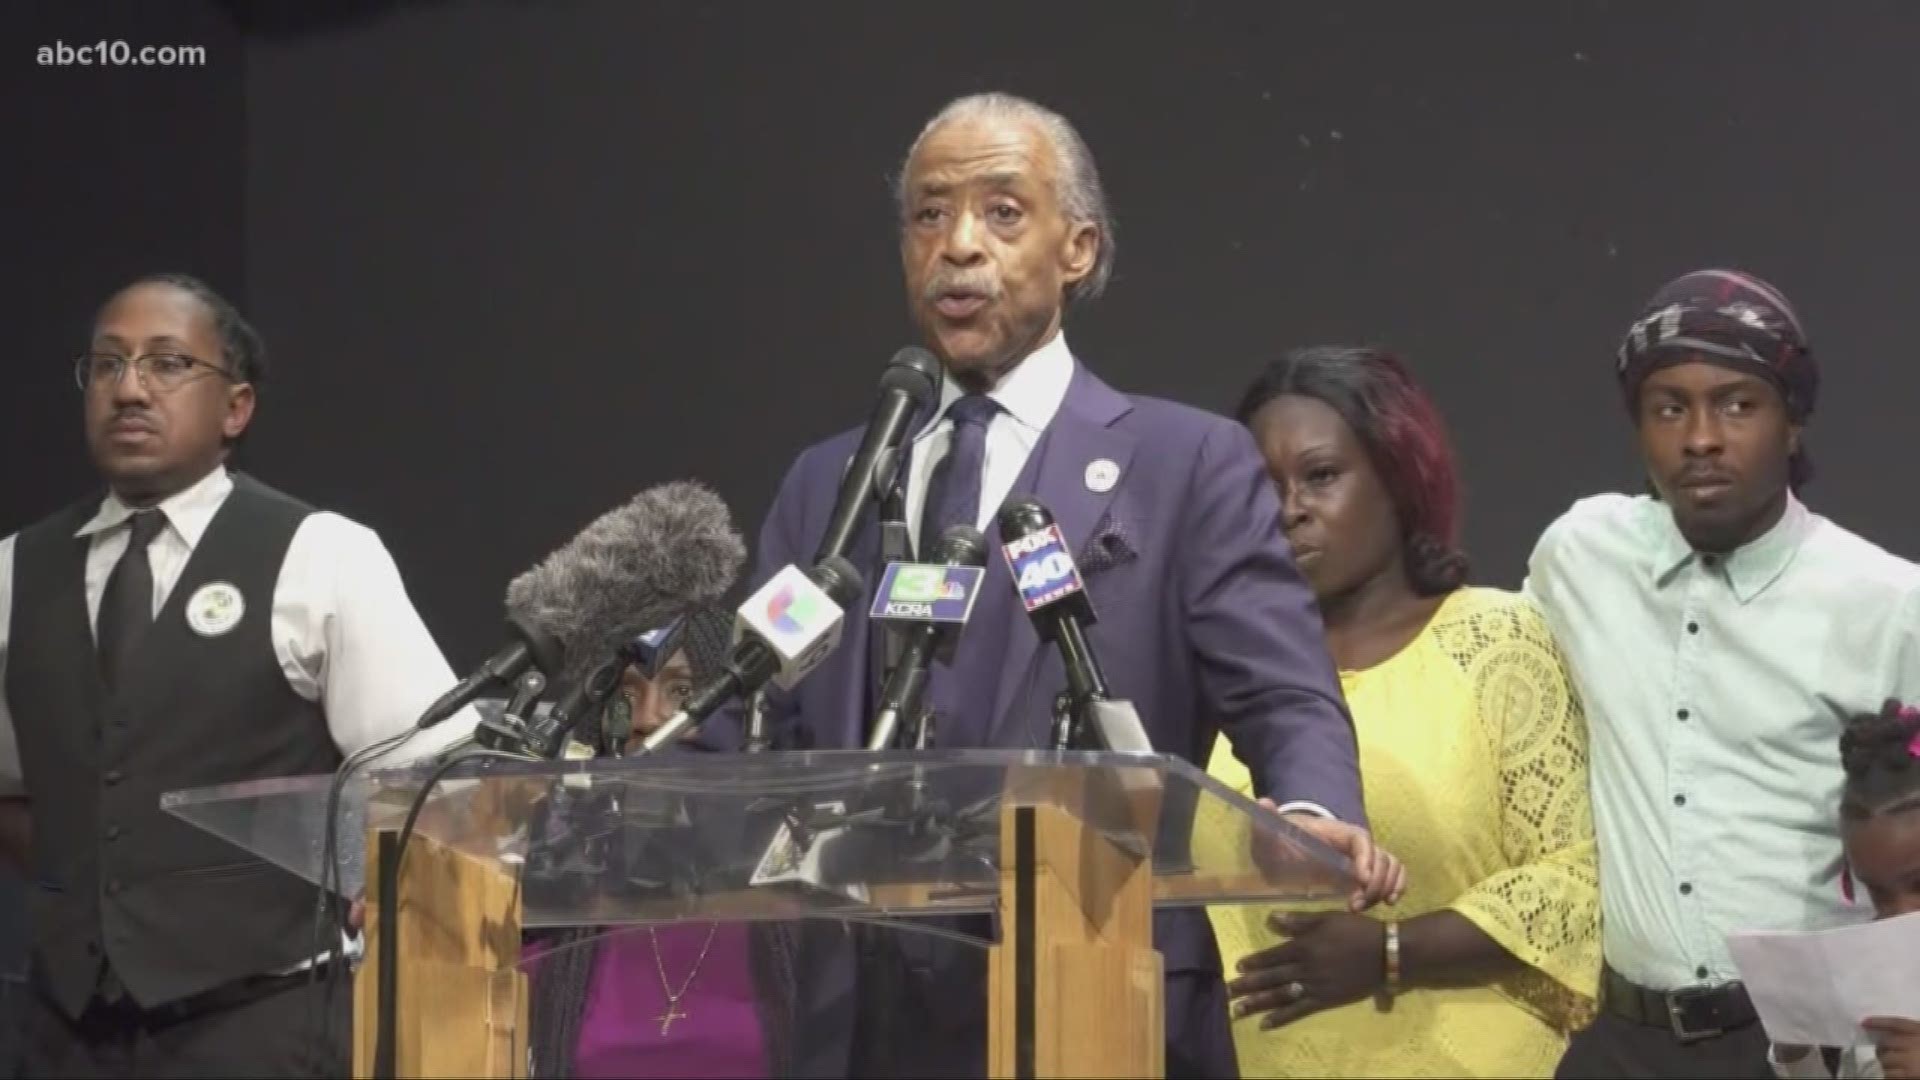 Rev. Al Shaprton traveled back to Sacramento Wednesday night to mark the six-month anniversary of the police shooting of Stephon Clark in his grandmother's backyard.